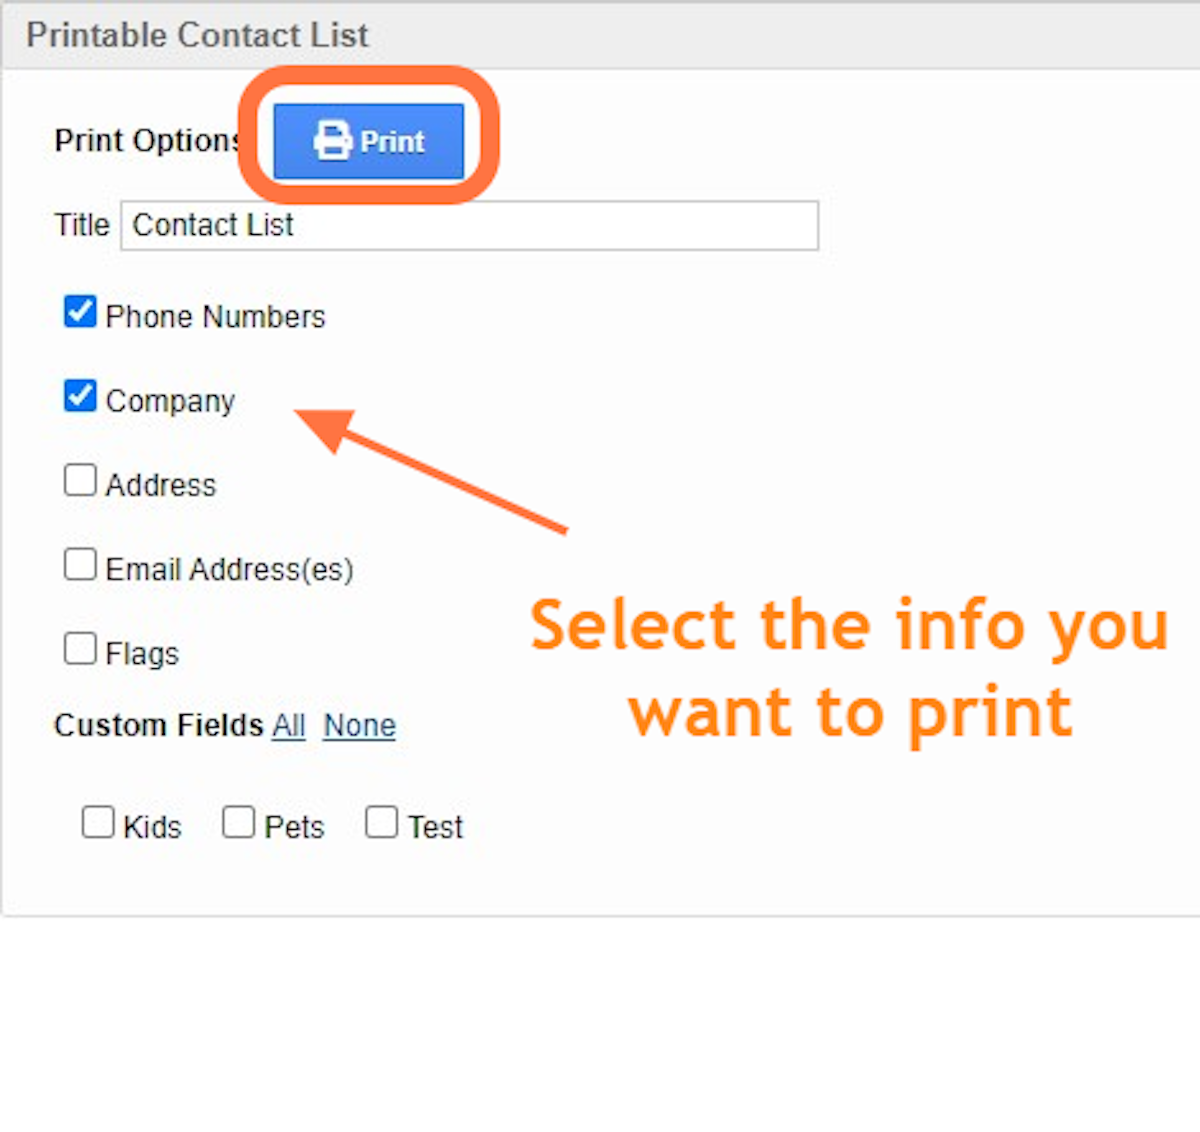 A new window will open with the print settings. Select the information you want to include & click 'Print'